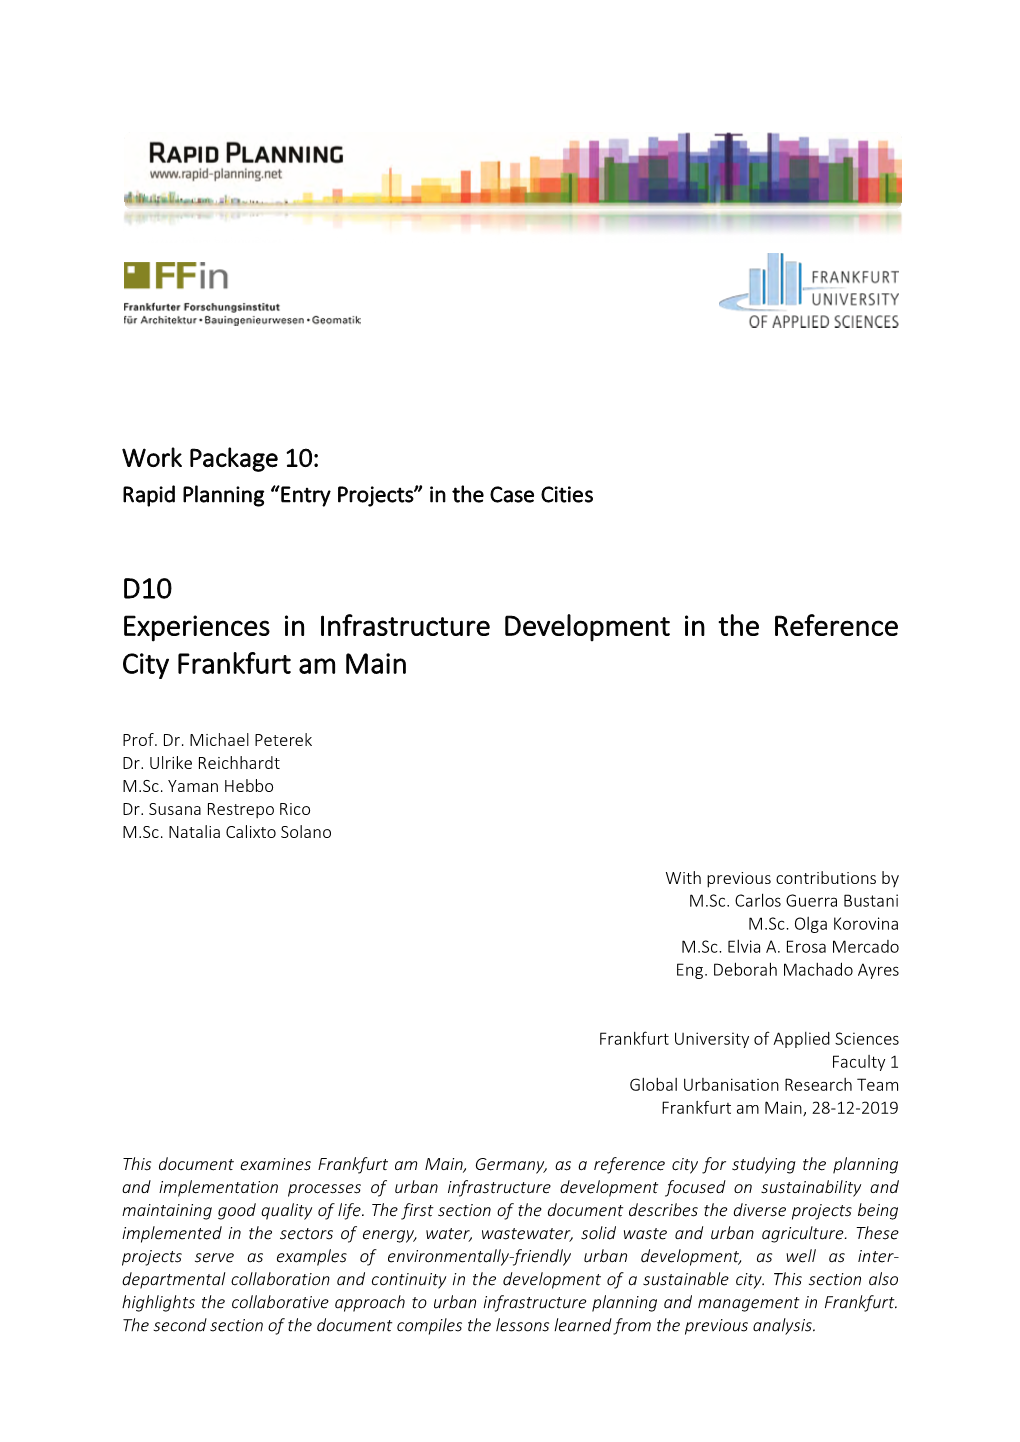 D10 Experiences in Infrastructure Development in the Reference City Frankfurt Am Main